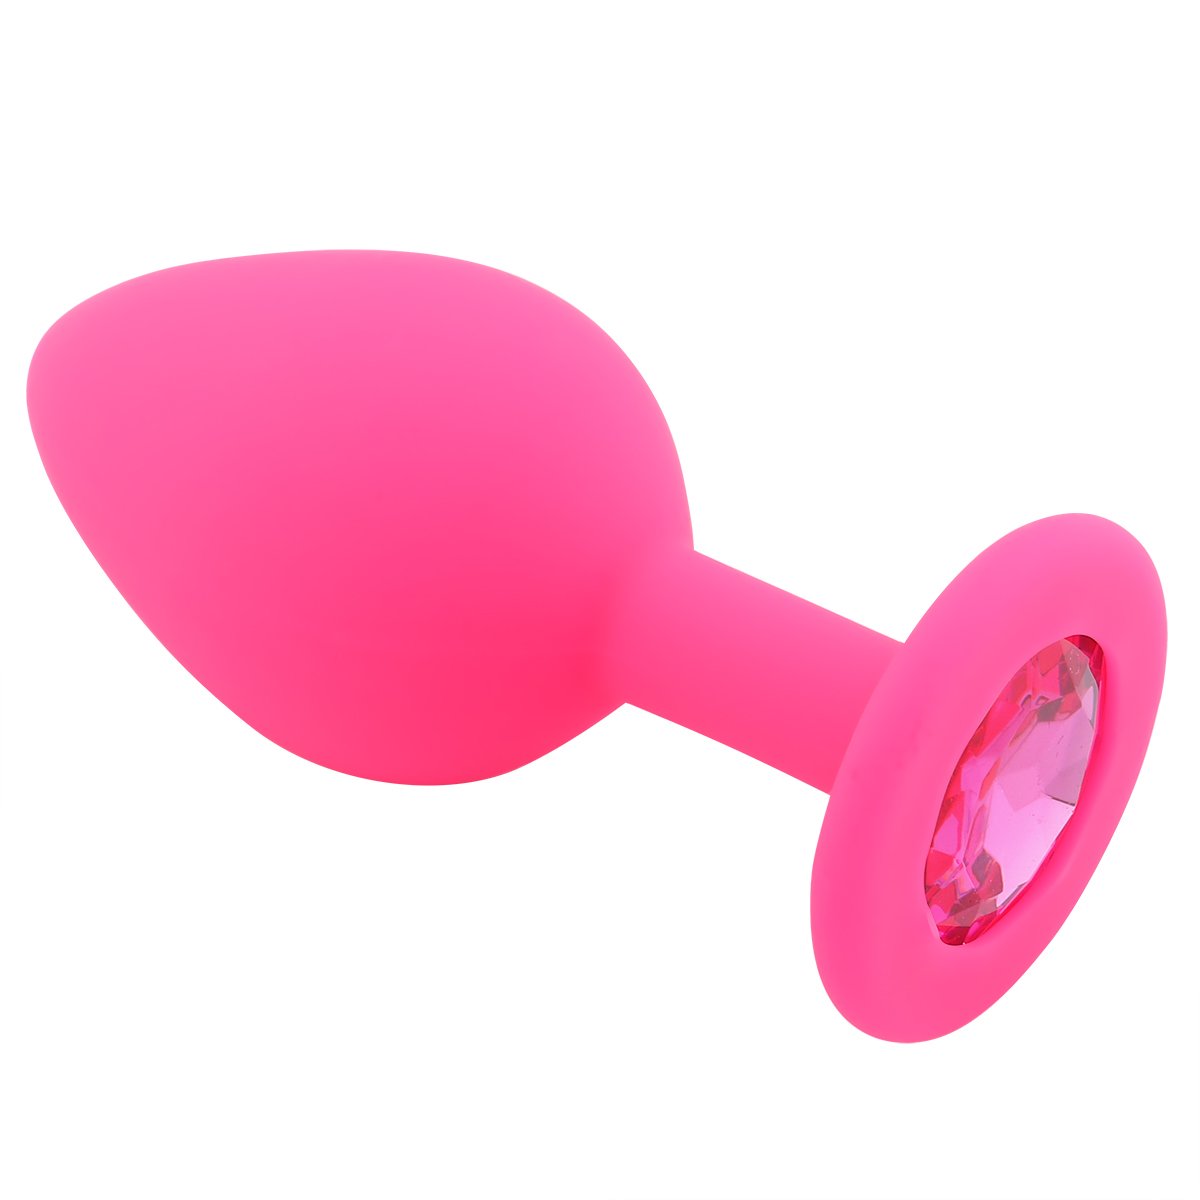 Foto van Banoch - Buttplug Caribbean Madness Hot Pink Small - Siliconen Roze Diamant